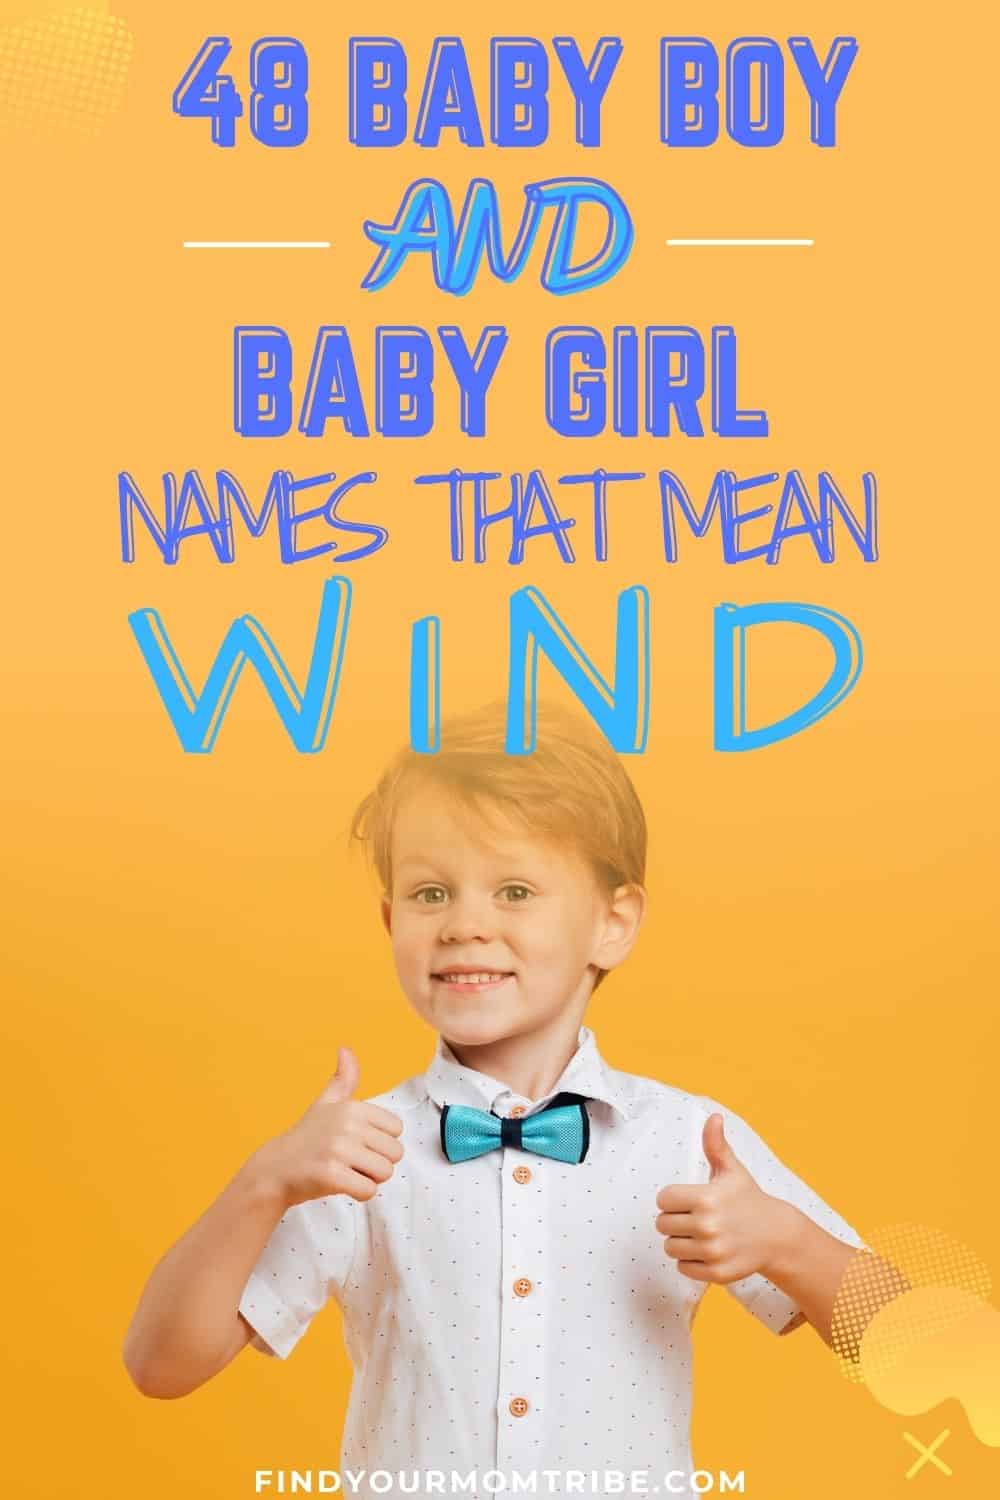 Names That Mean Wind pinterest